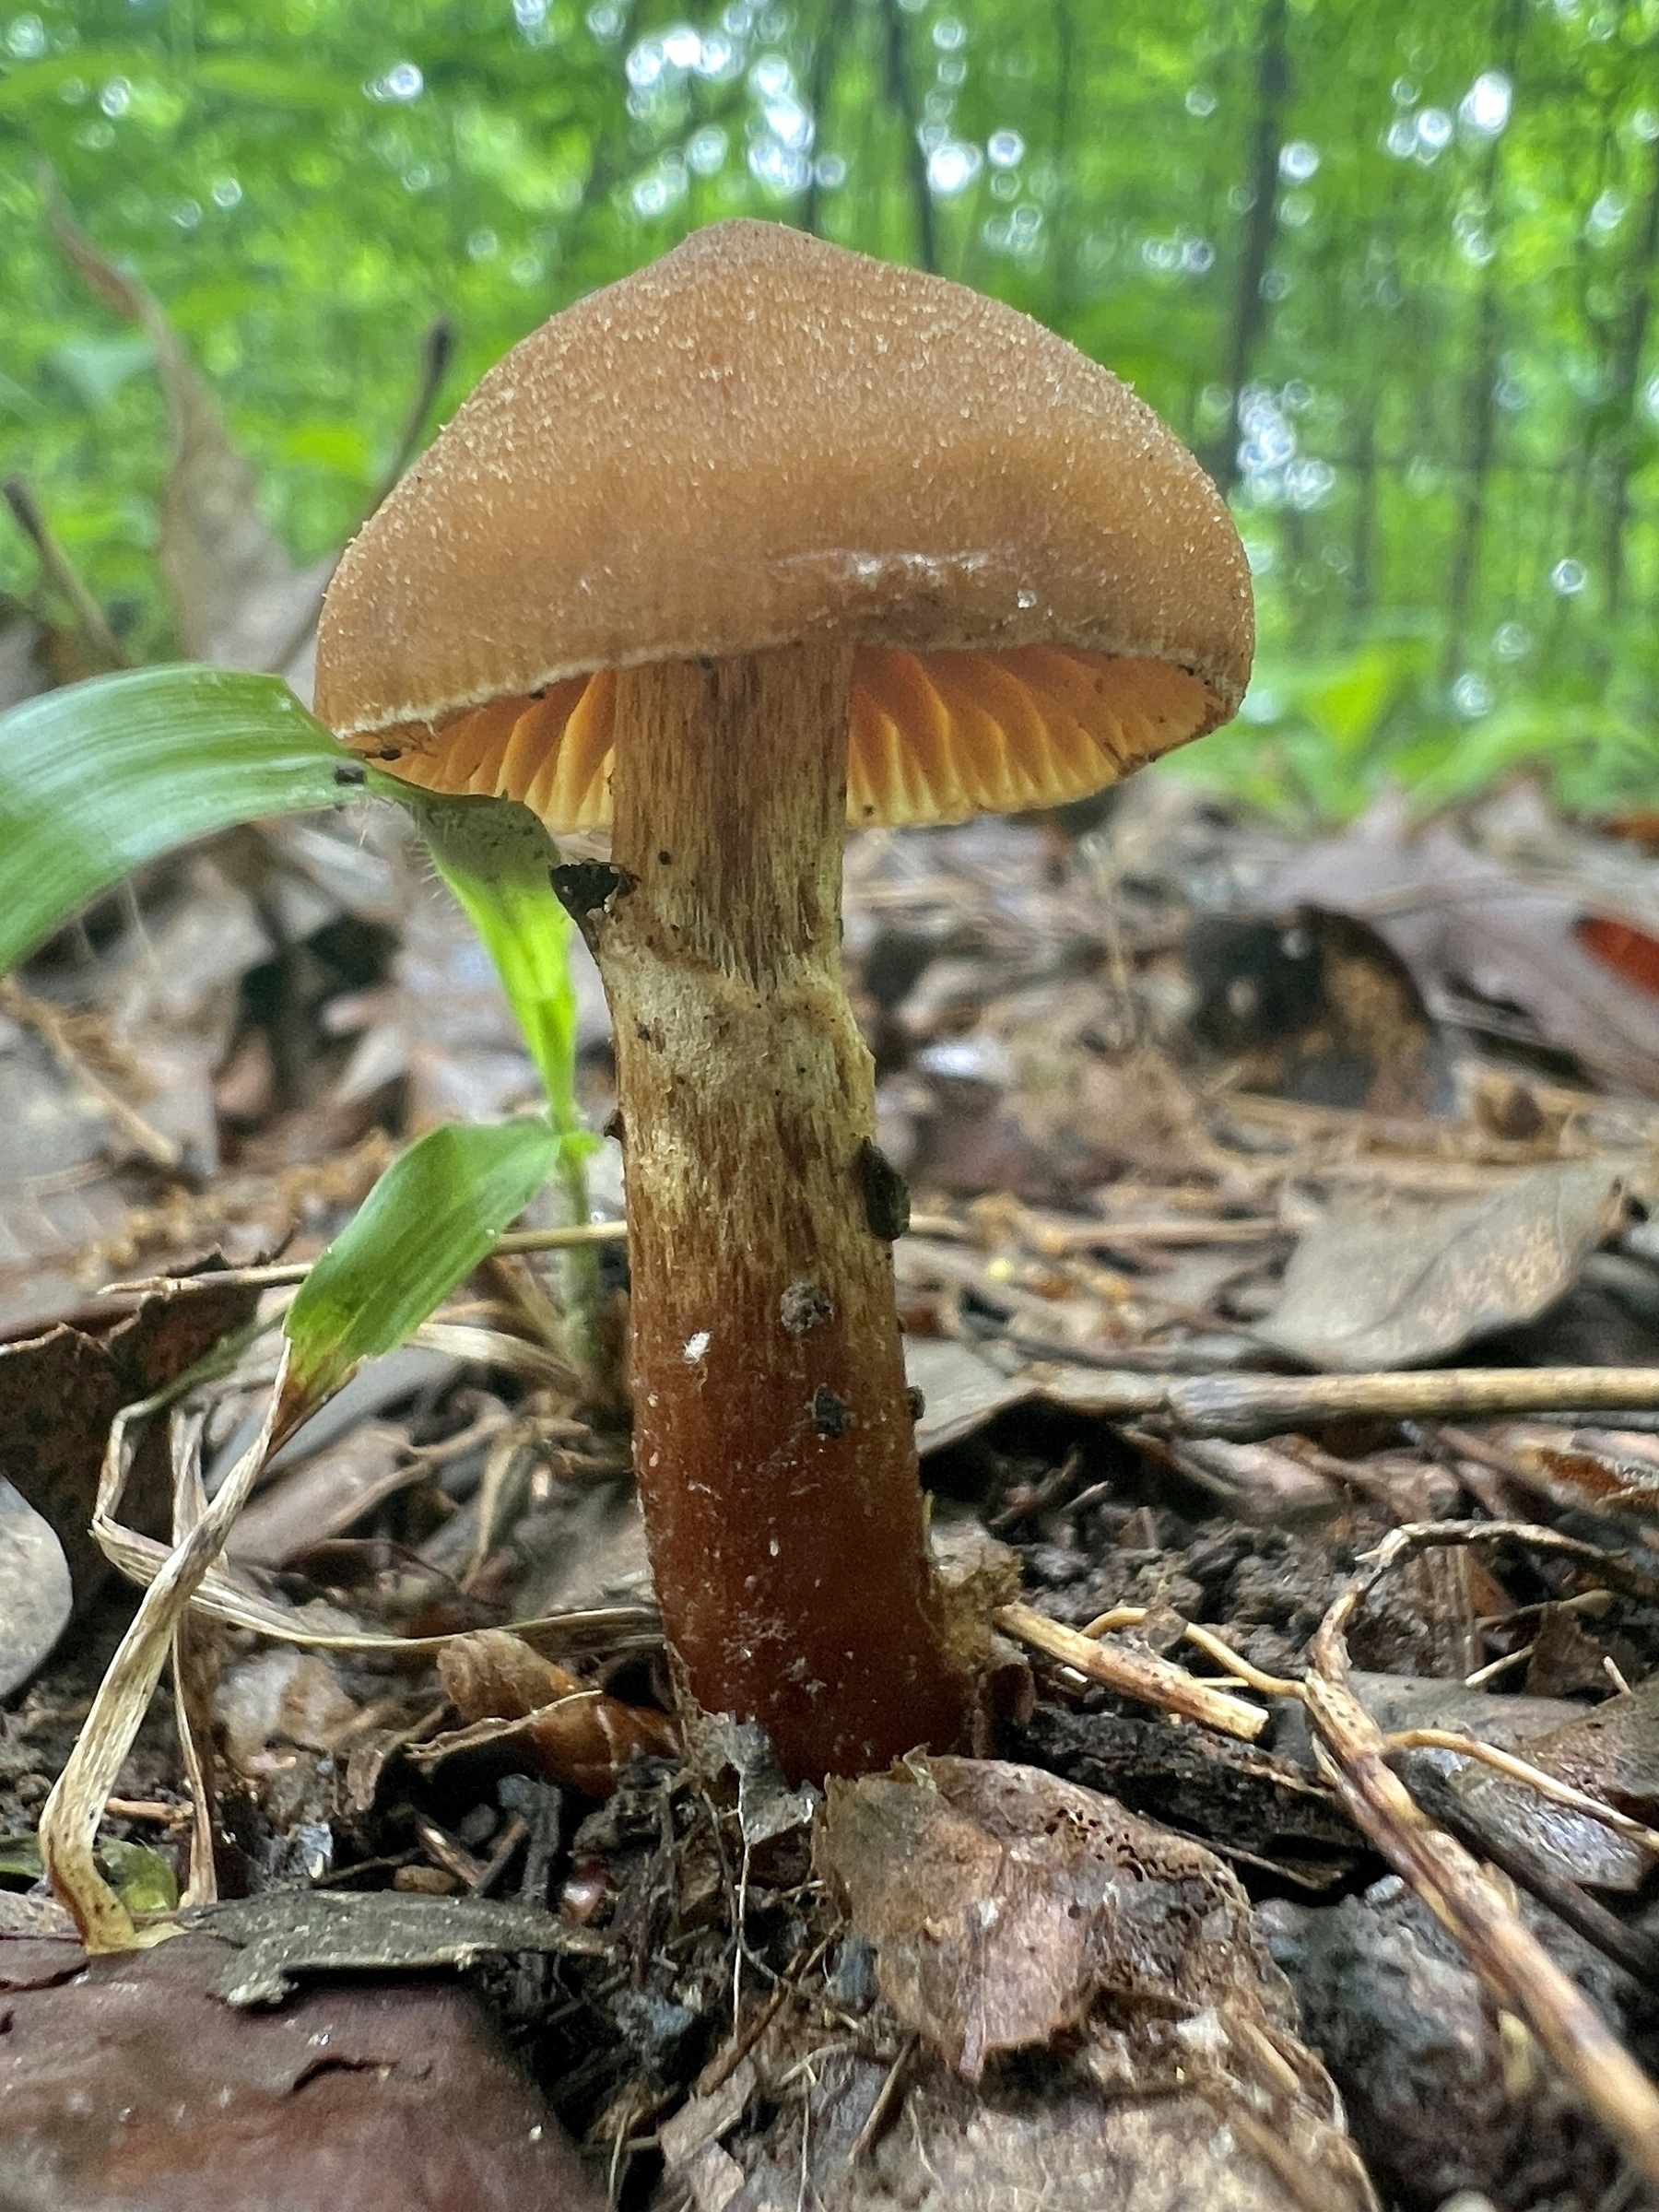 A orange-brown mushroom grows out of decomposing leaves in the forest